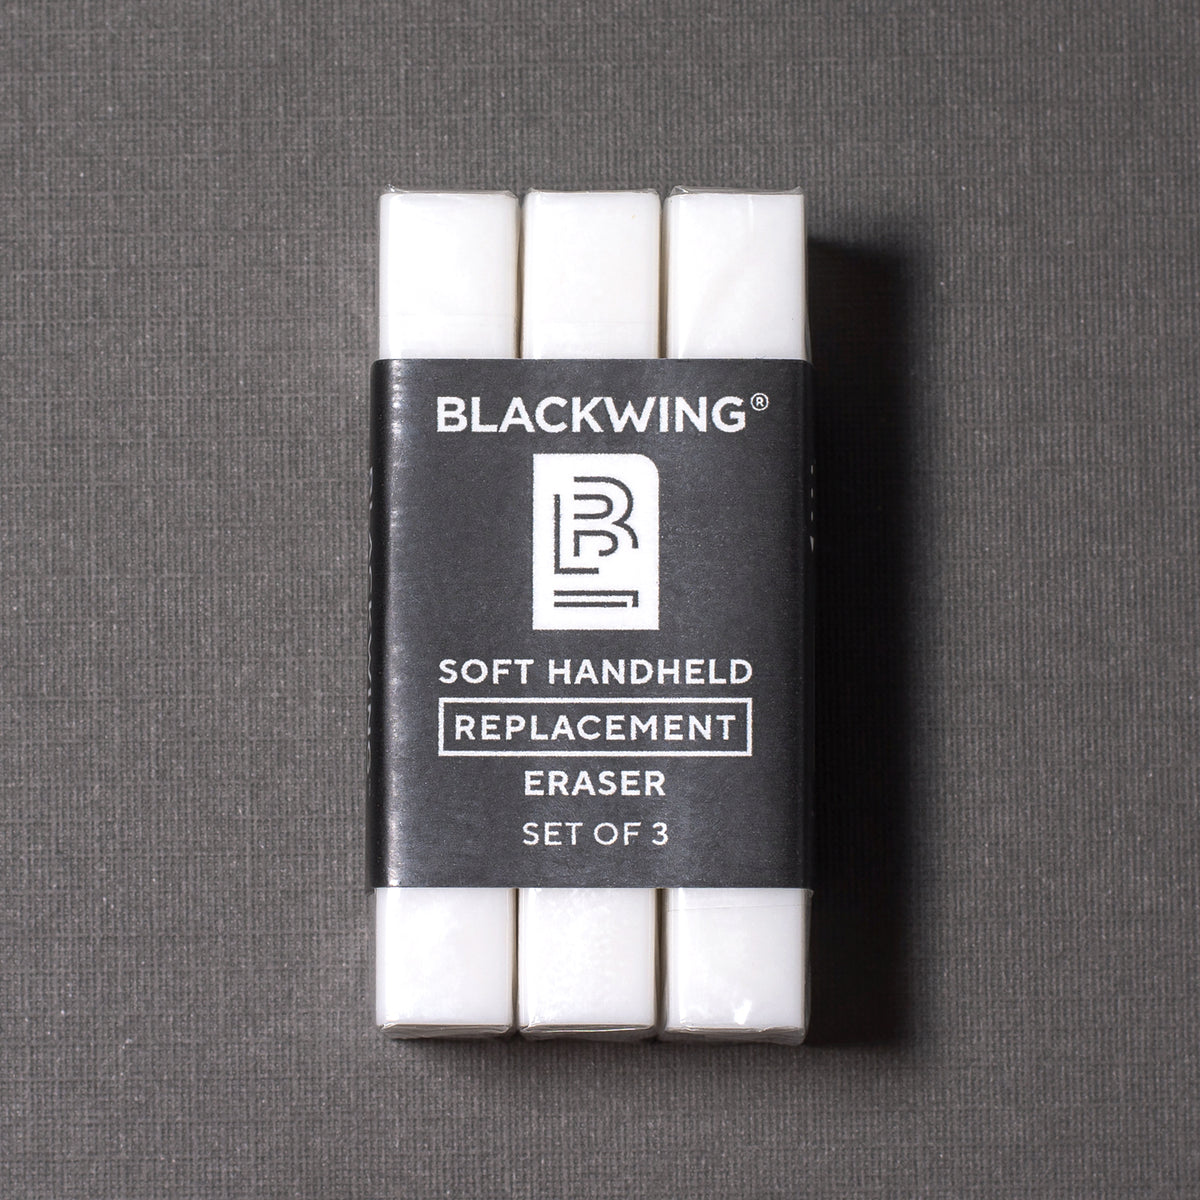 Upgrade your eraser game with this set of 3 Blackwing Handheld Eraser Replacements. Designed to work effortlessly with graphite, these handheld erasers are perfect for precise edits and corrections.